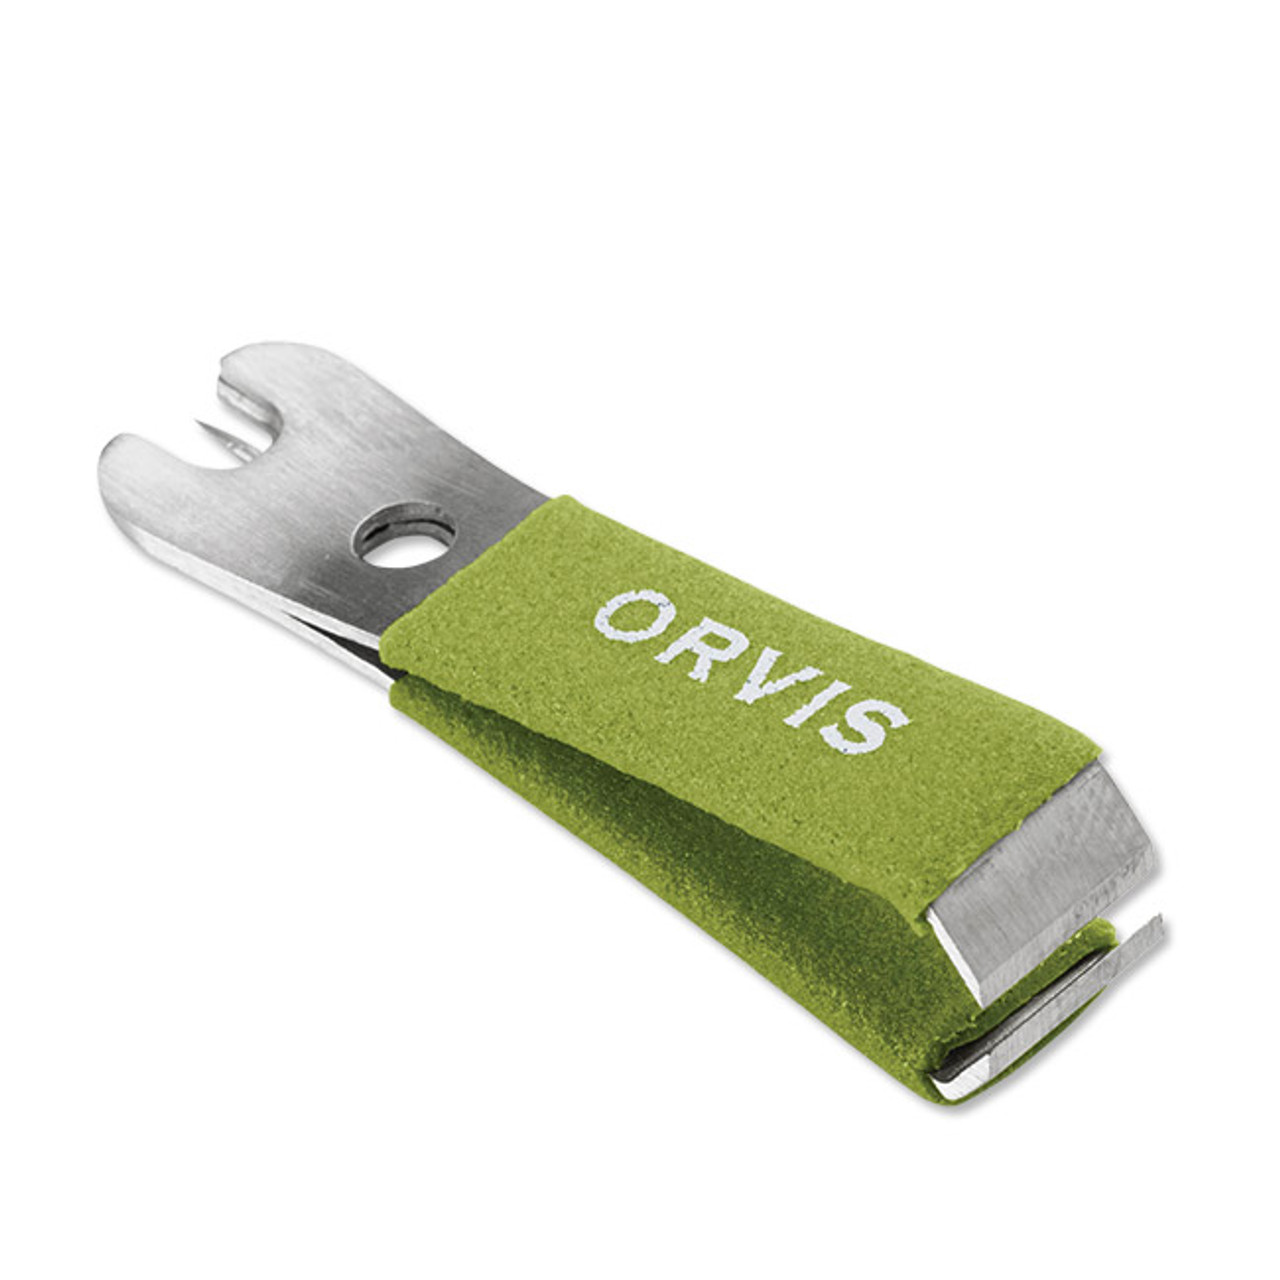 Orvis Comfy Grip Nippers - Ed's Fly Shop